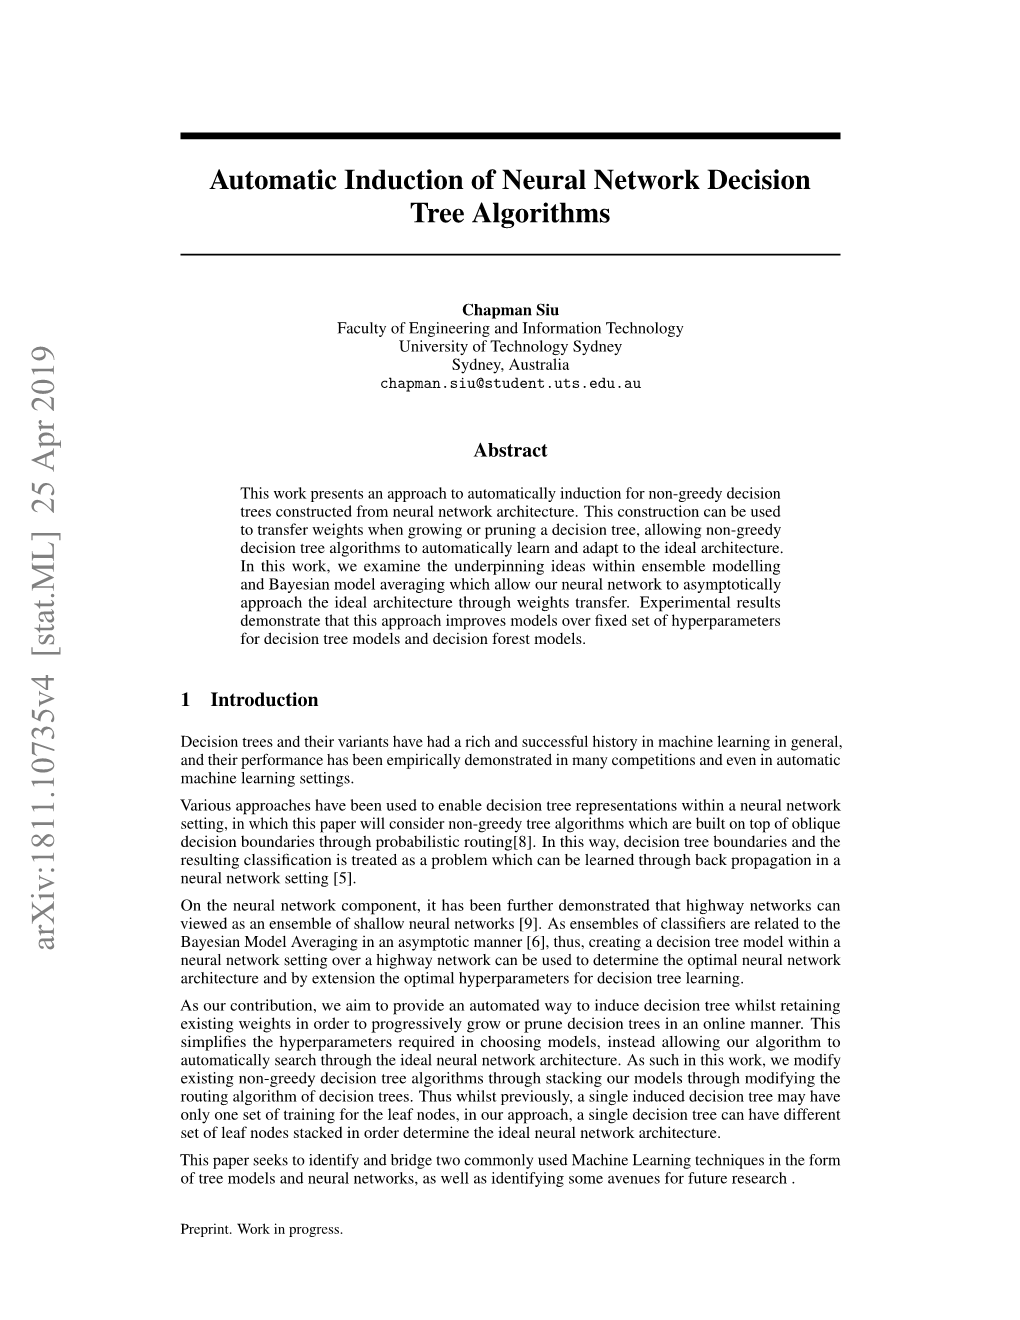 Automatic Induction of Neural Network Decision Tree Algorithms